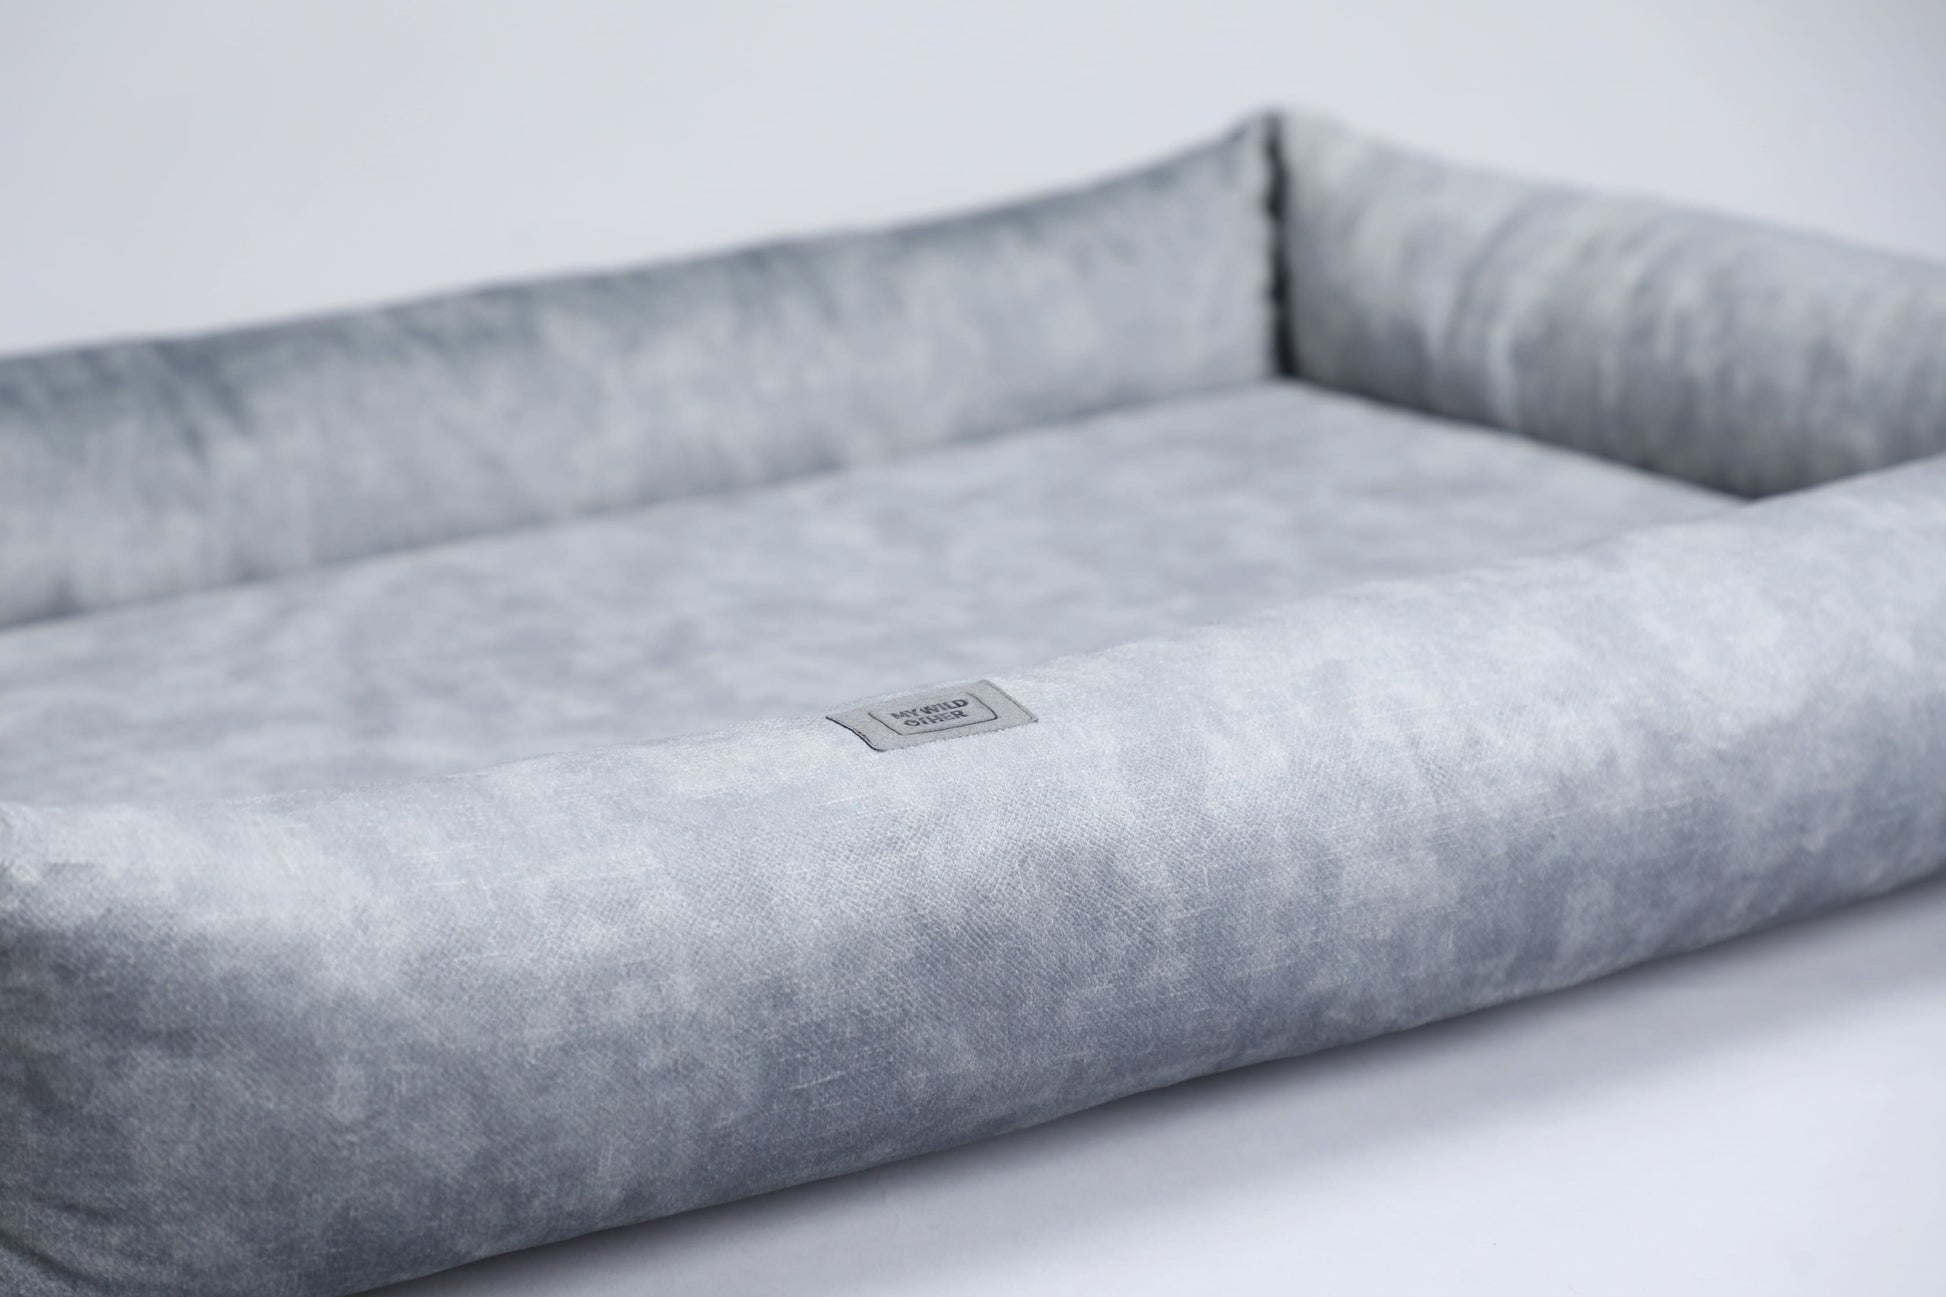 2-sided dog bed with sides. METAL GREY - premium dog goods handmade in Europe by My Wild Other